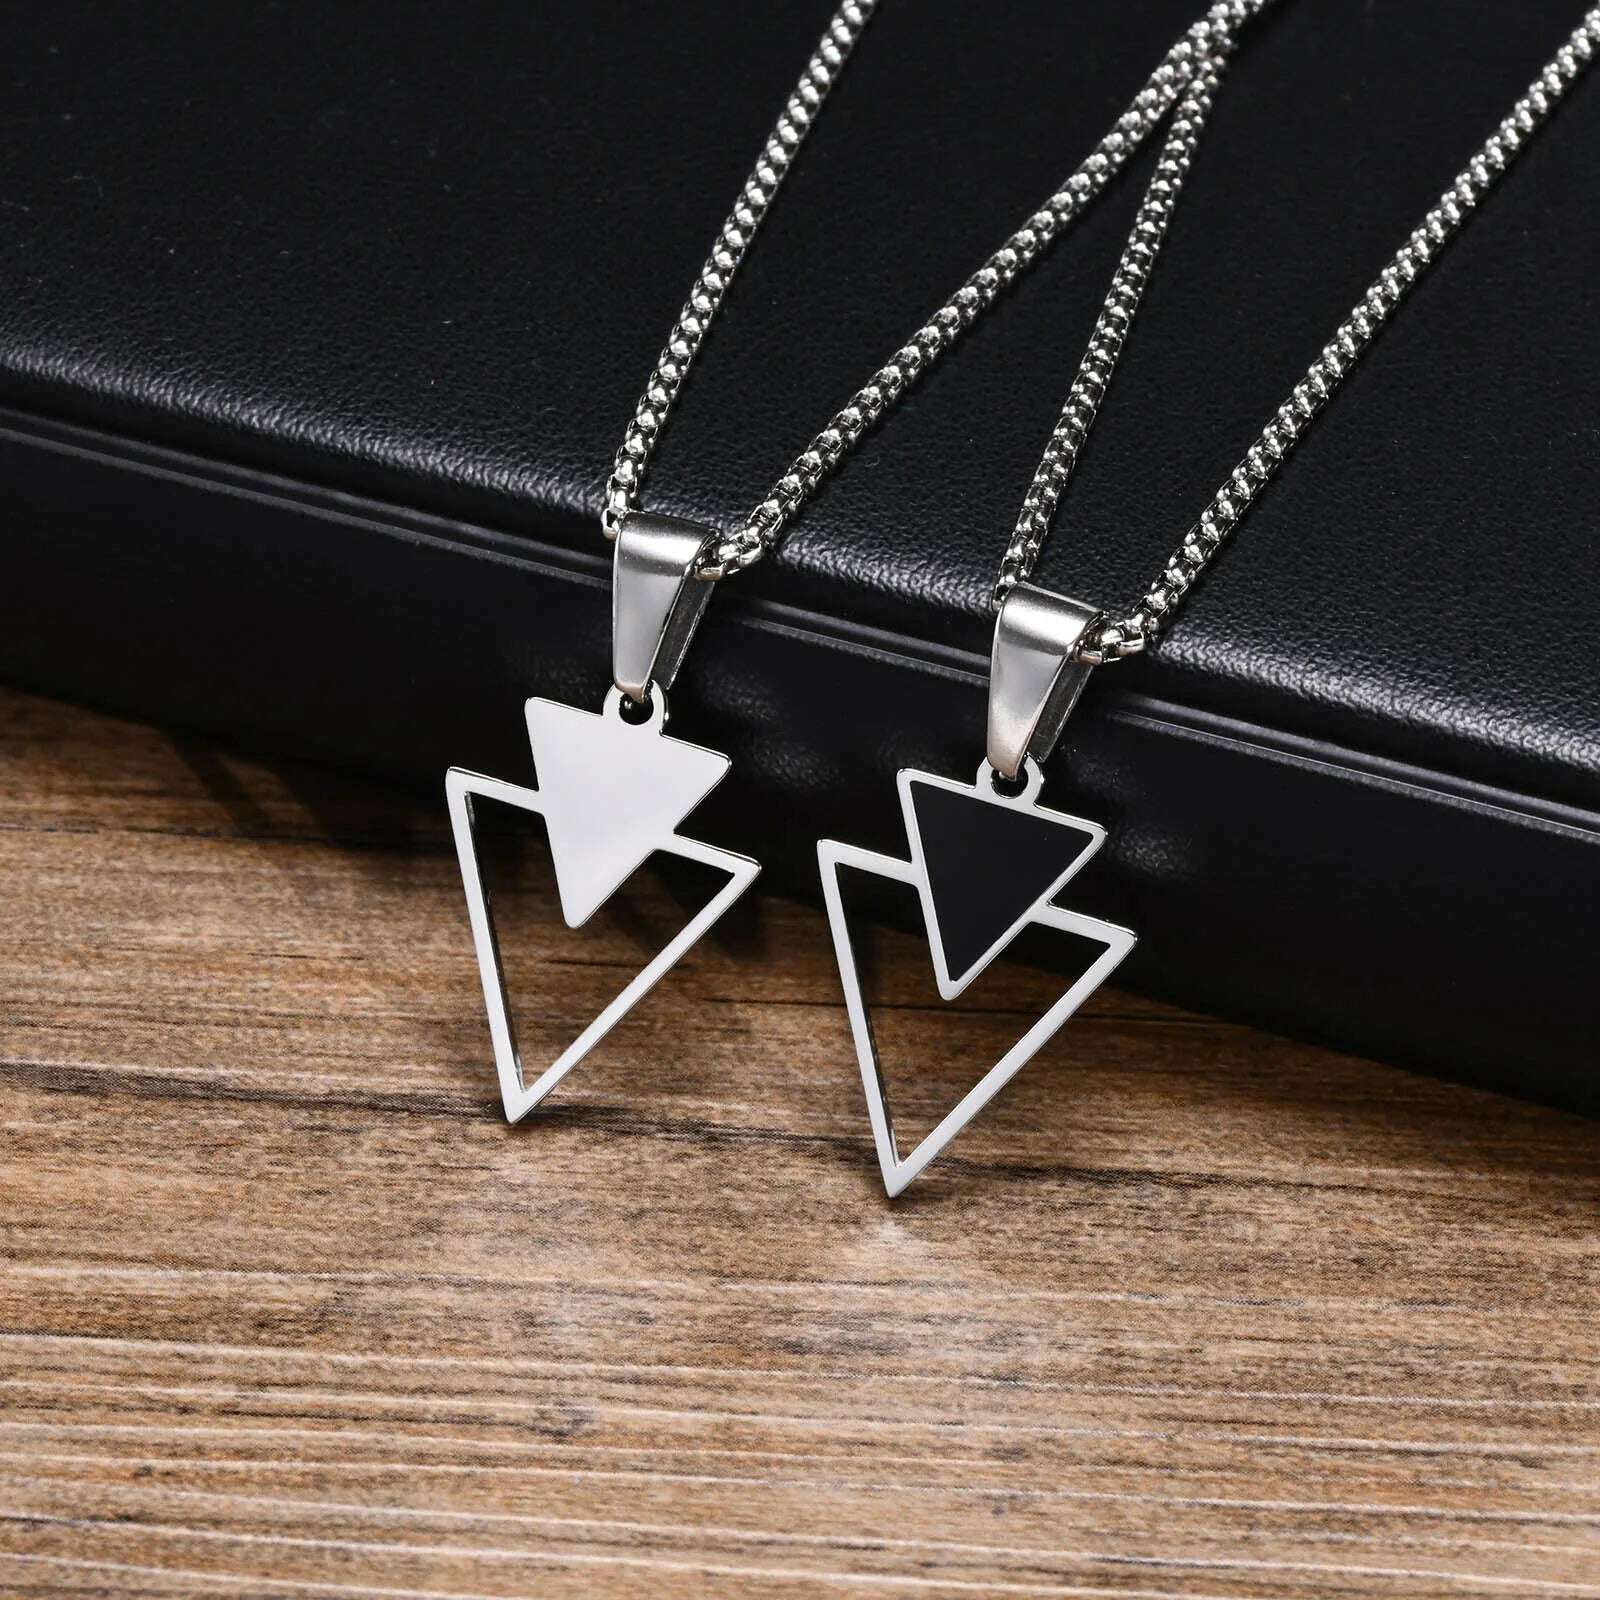 KIMLUD, Vnox New Fashion Triangle Pendant Necklace for Men Boys, Minimalist Stainless Steel Hollow Geometric Collar Male Jewelry Gift, PN-1834S / 45cm, KIMLUD Womens Clothes